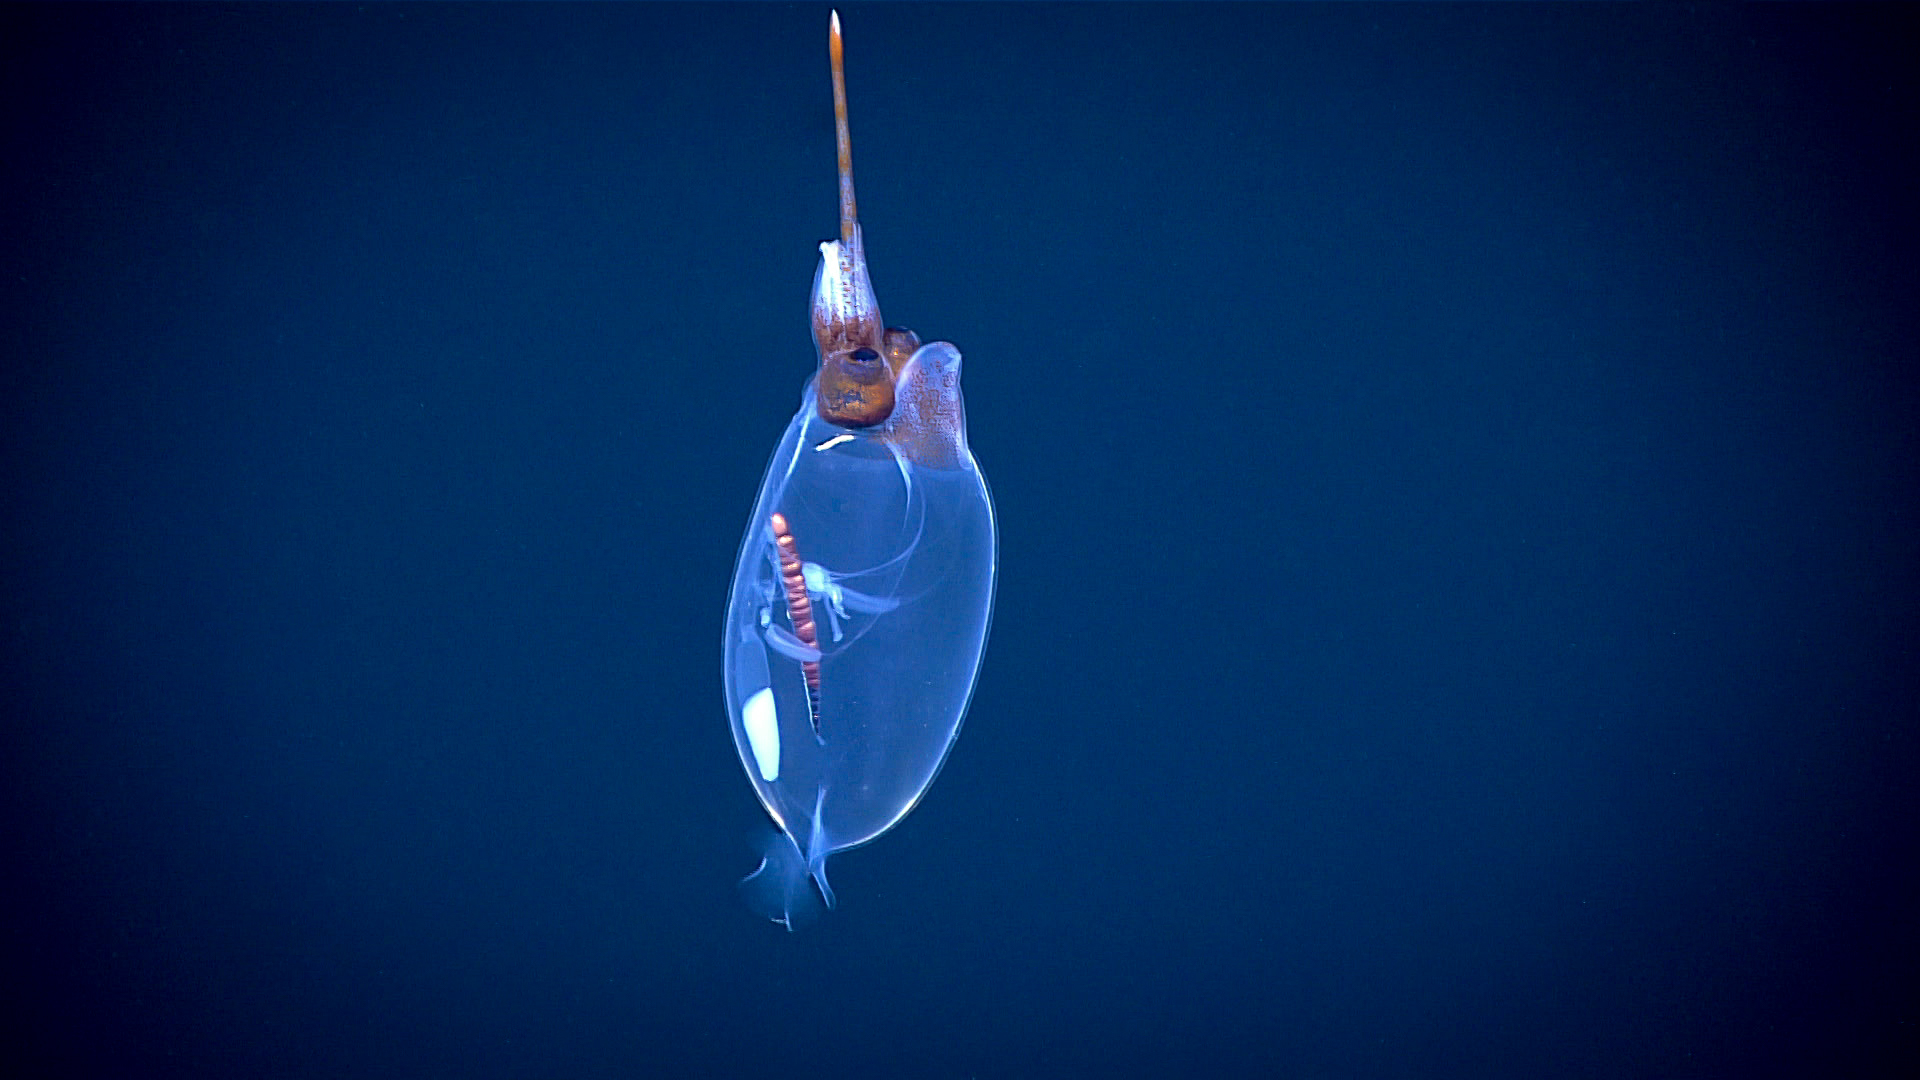 Cranchiid Squid observed during the Okeanos Explorer’s first ever full day of midwater exploration. The team also observed this squid expelling its white ink!